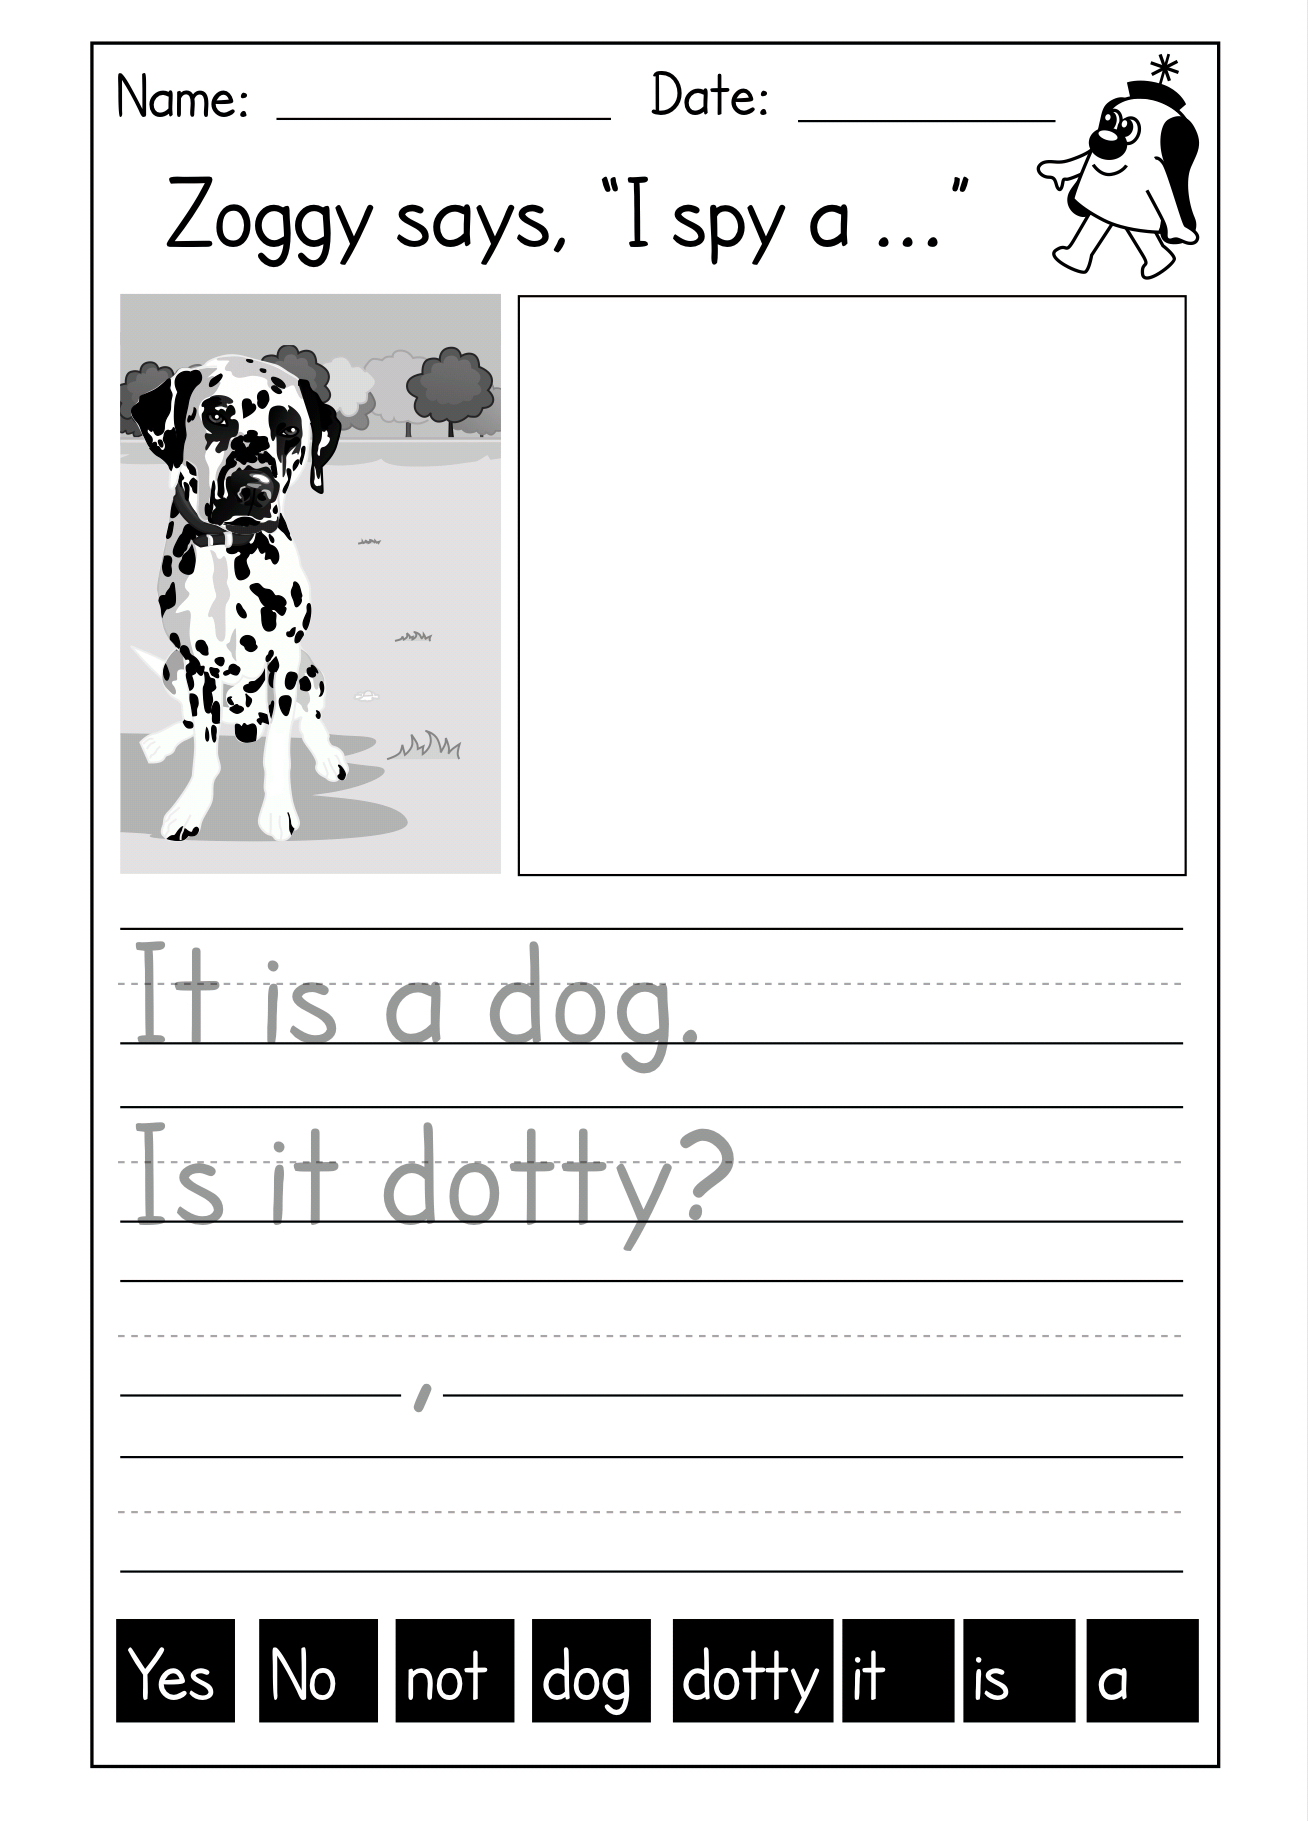 worksheets-to-practice-making-sentences-using-three-letter-words-4-7-years-teacha